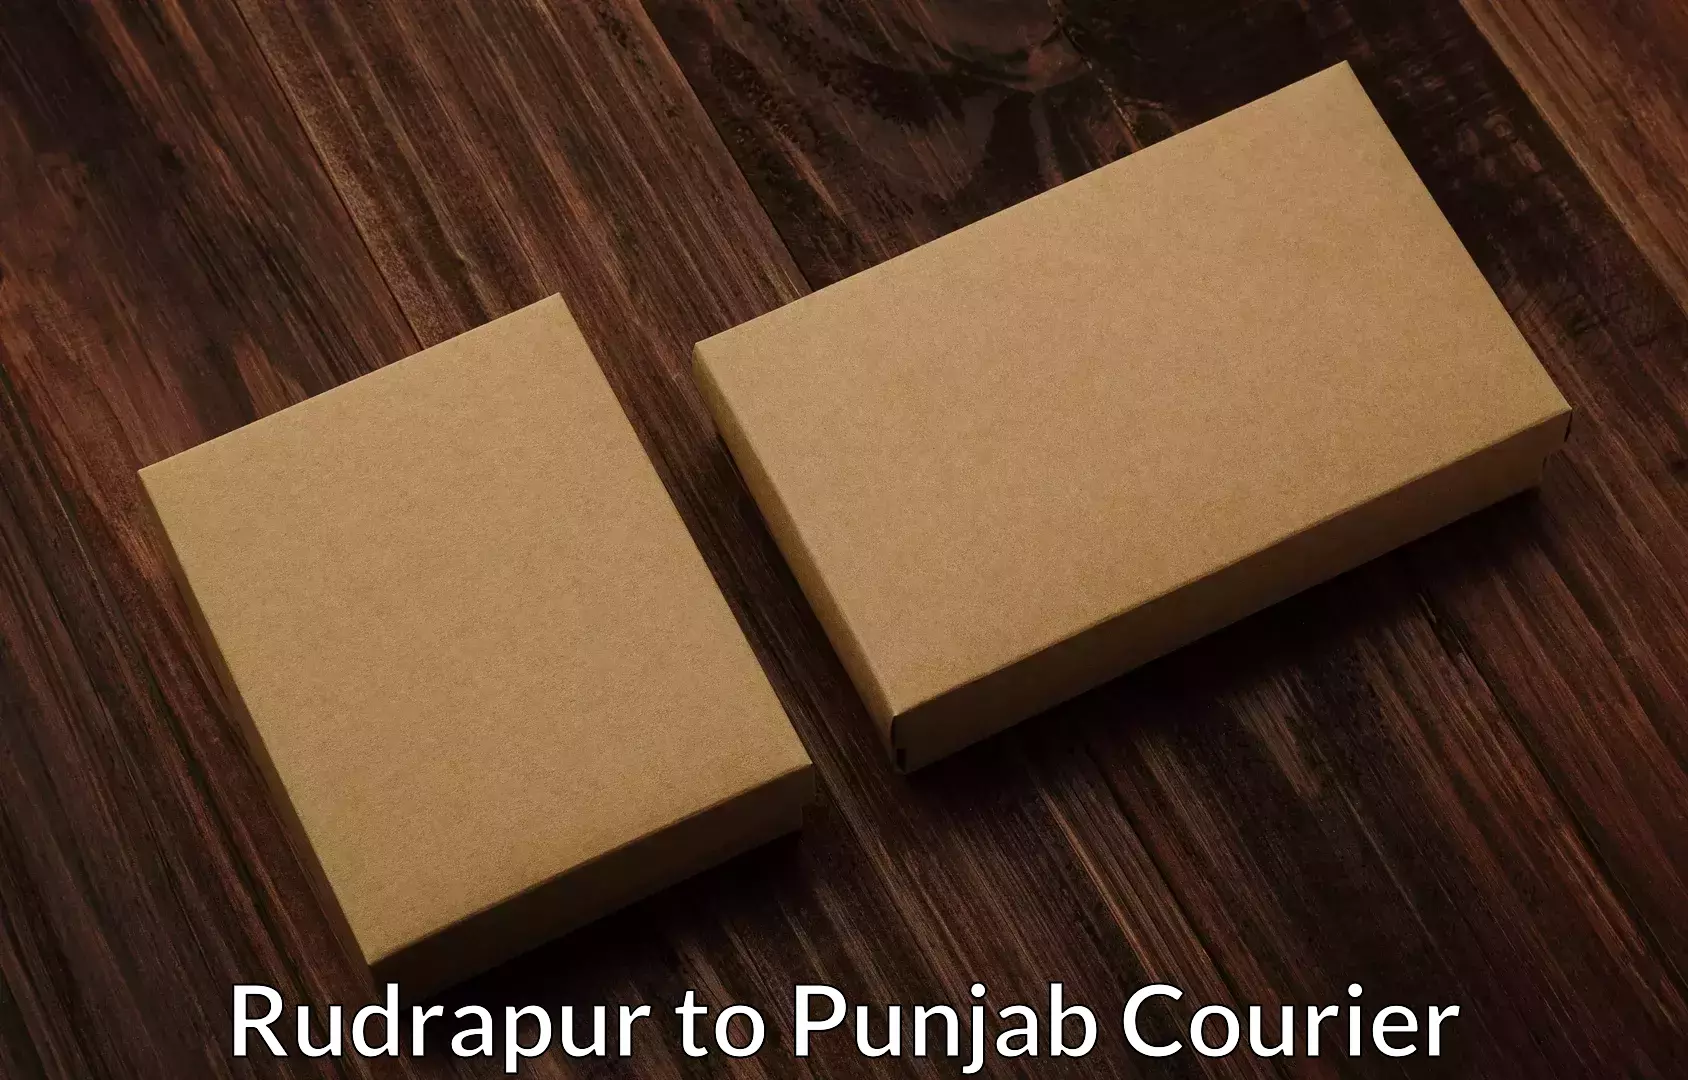 Professional relocation services Rudrapur to Bathinda